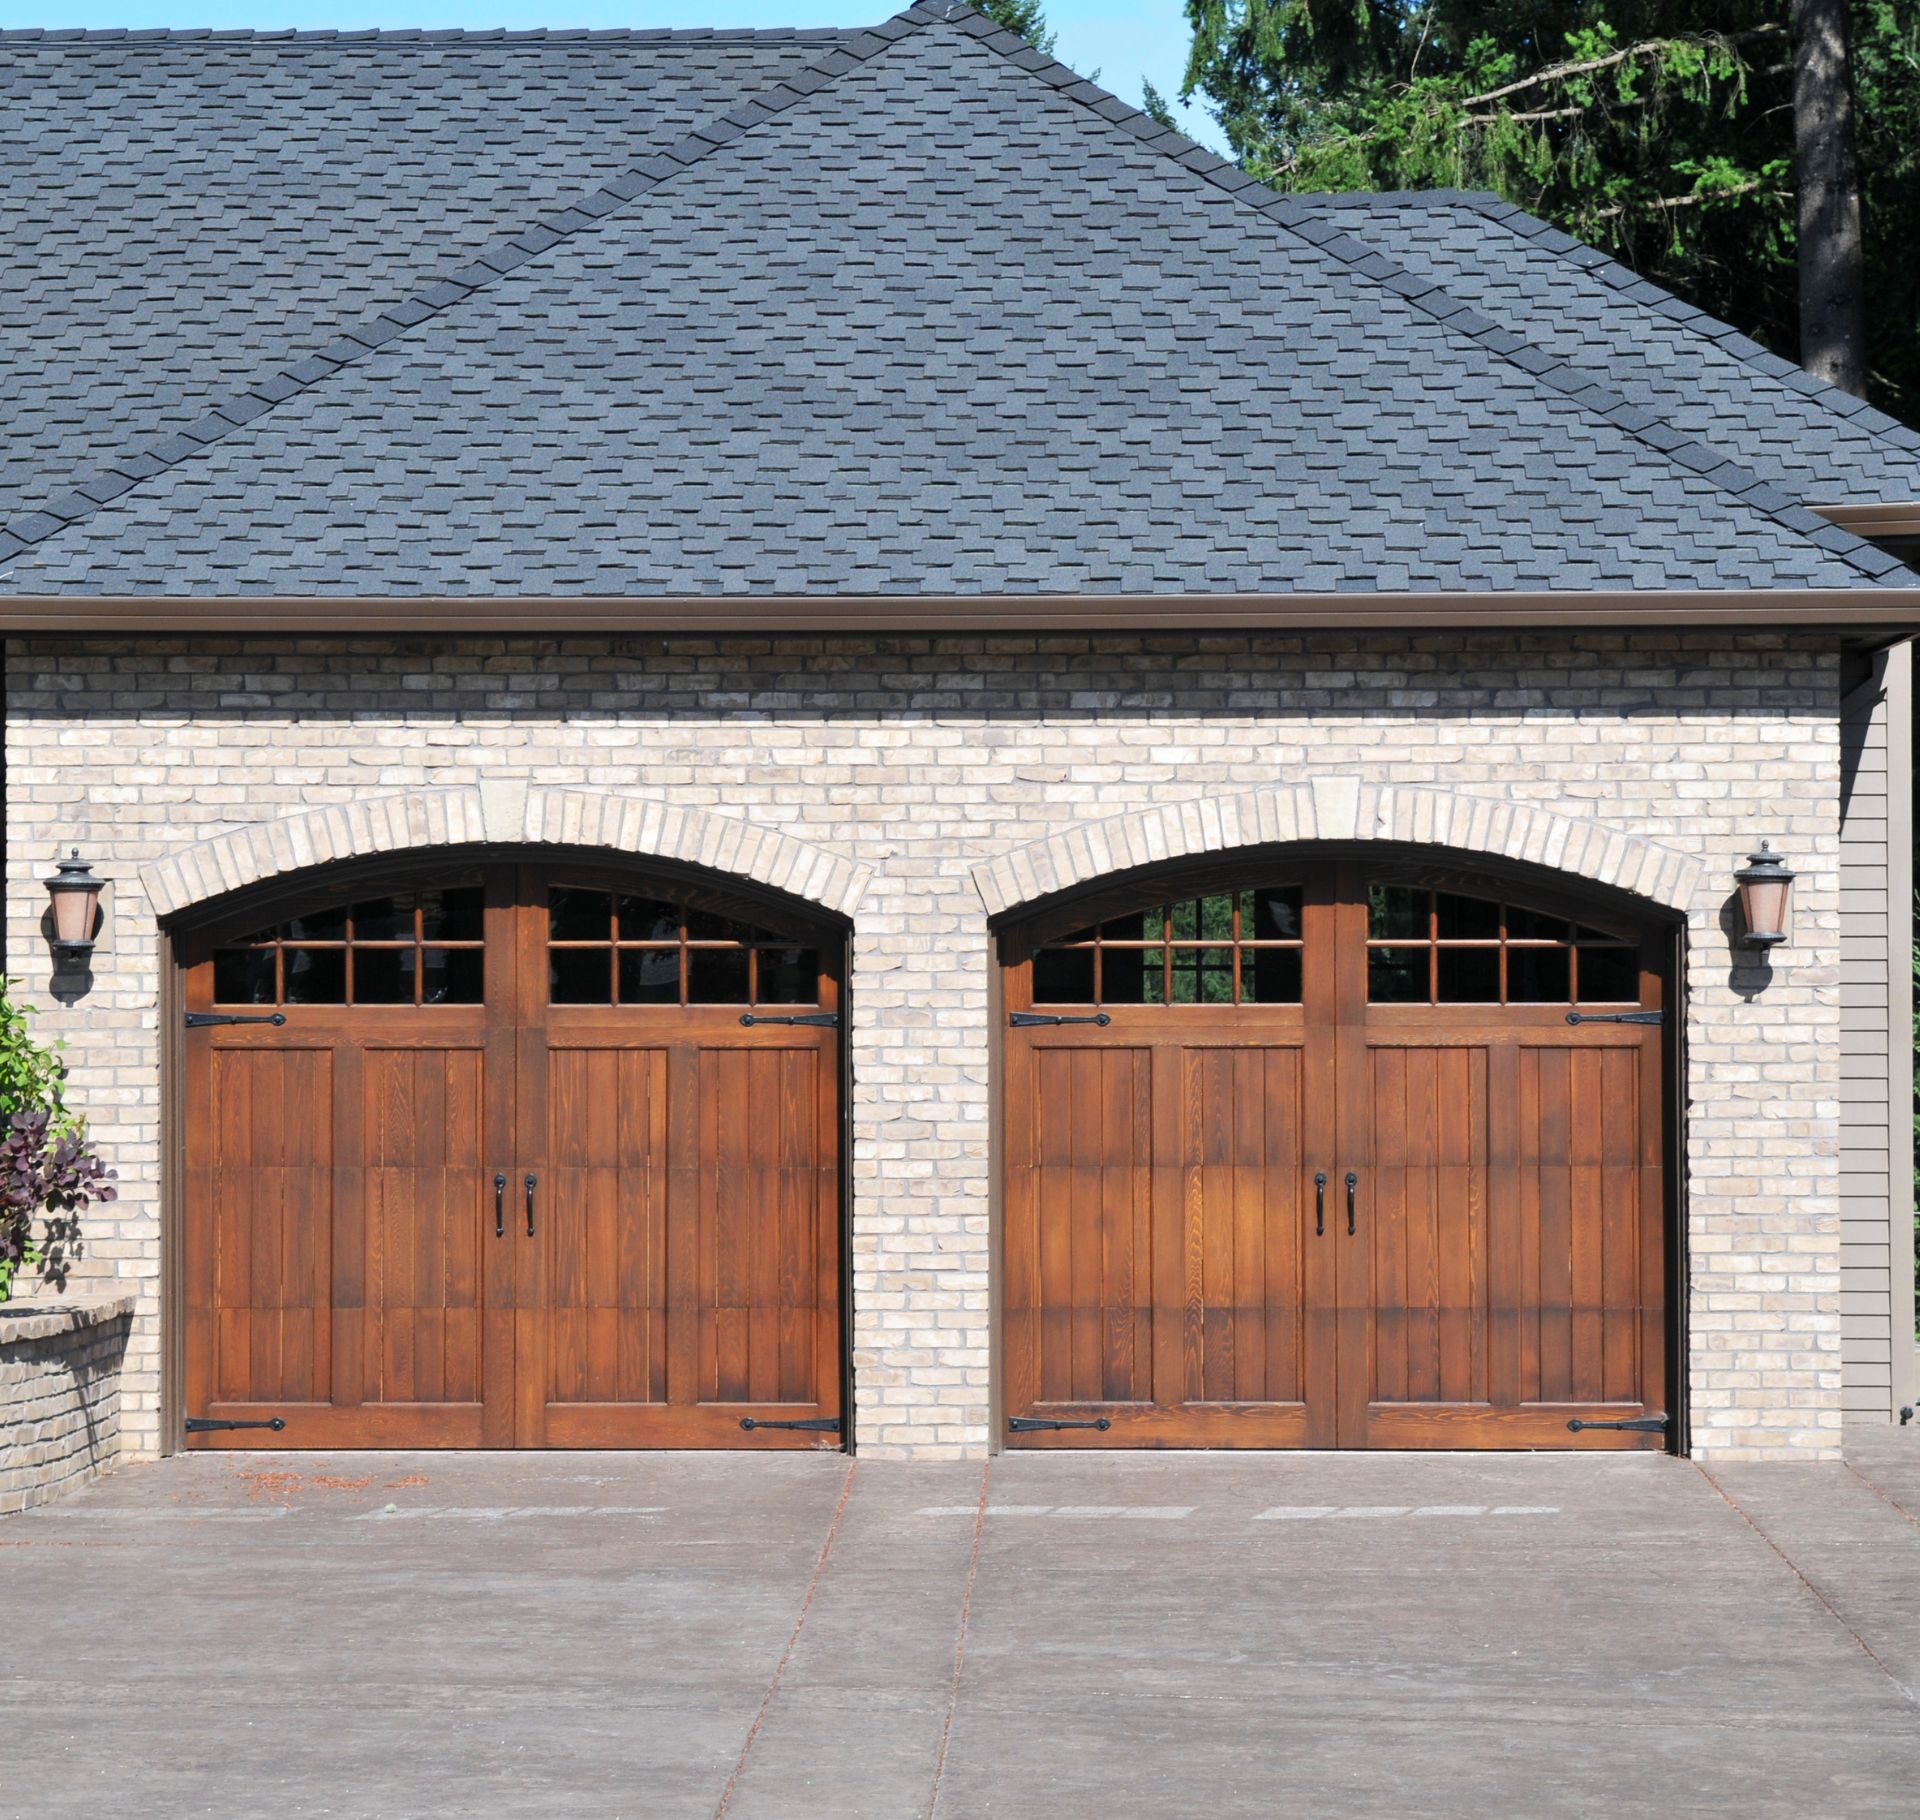 Wooden Garage Doors for Residential Use: Advantages and Disadvantages